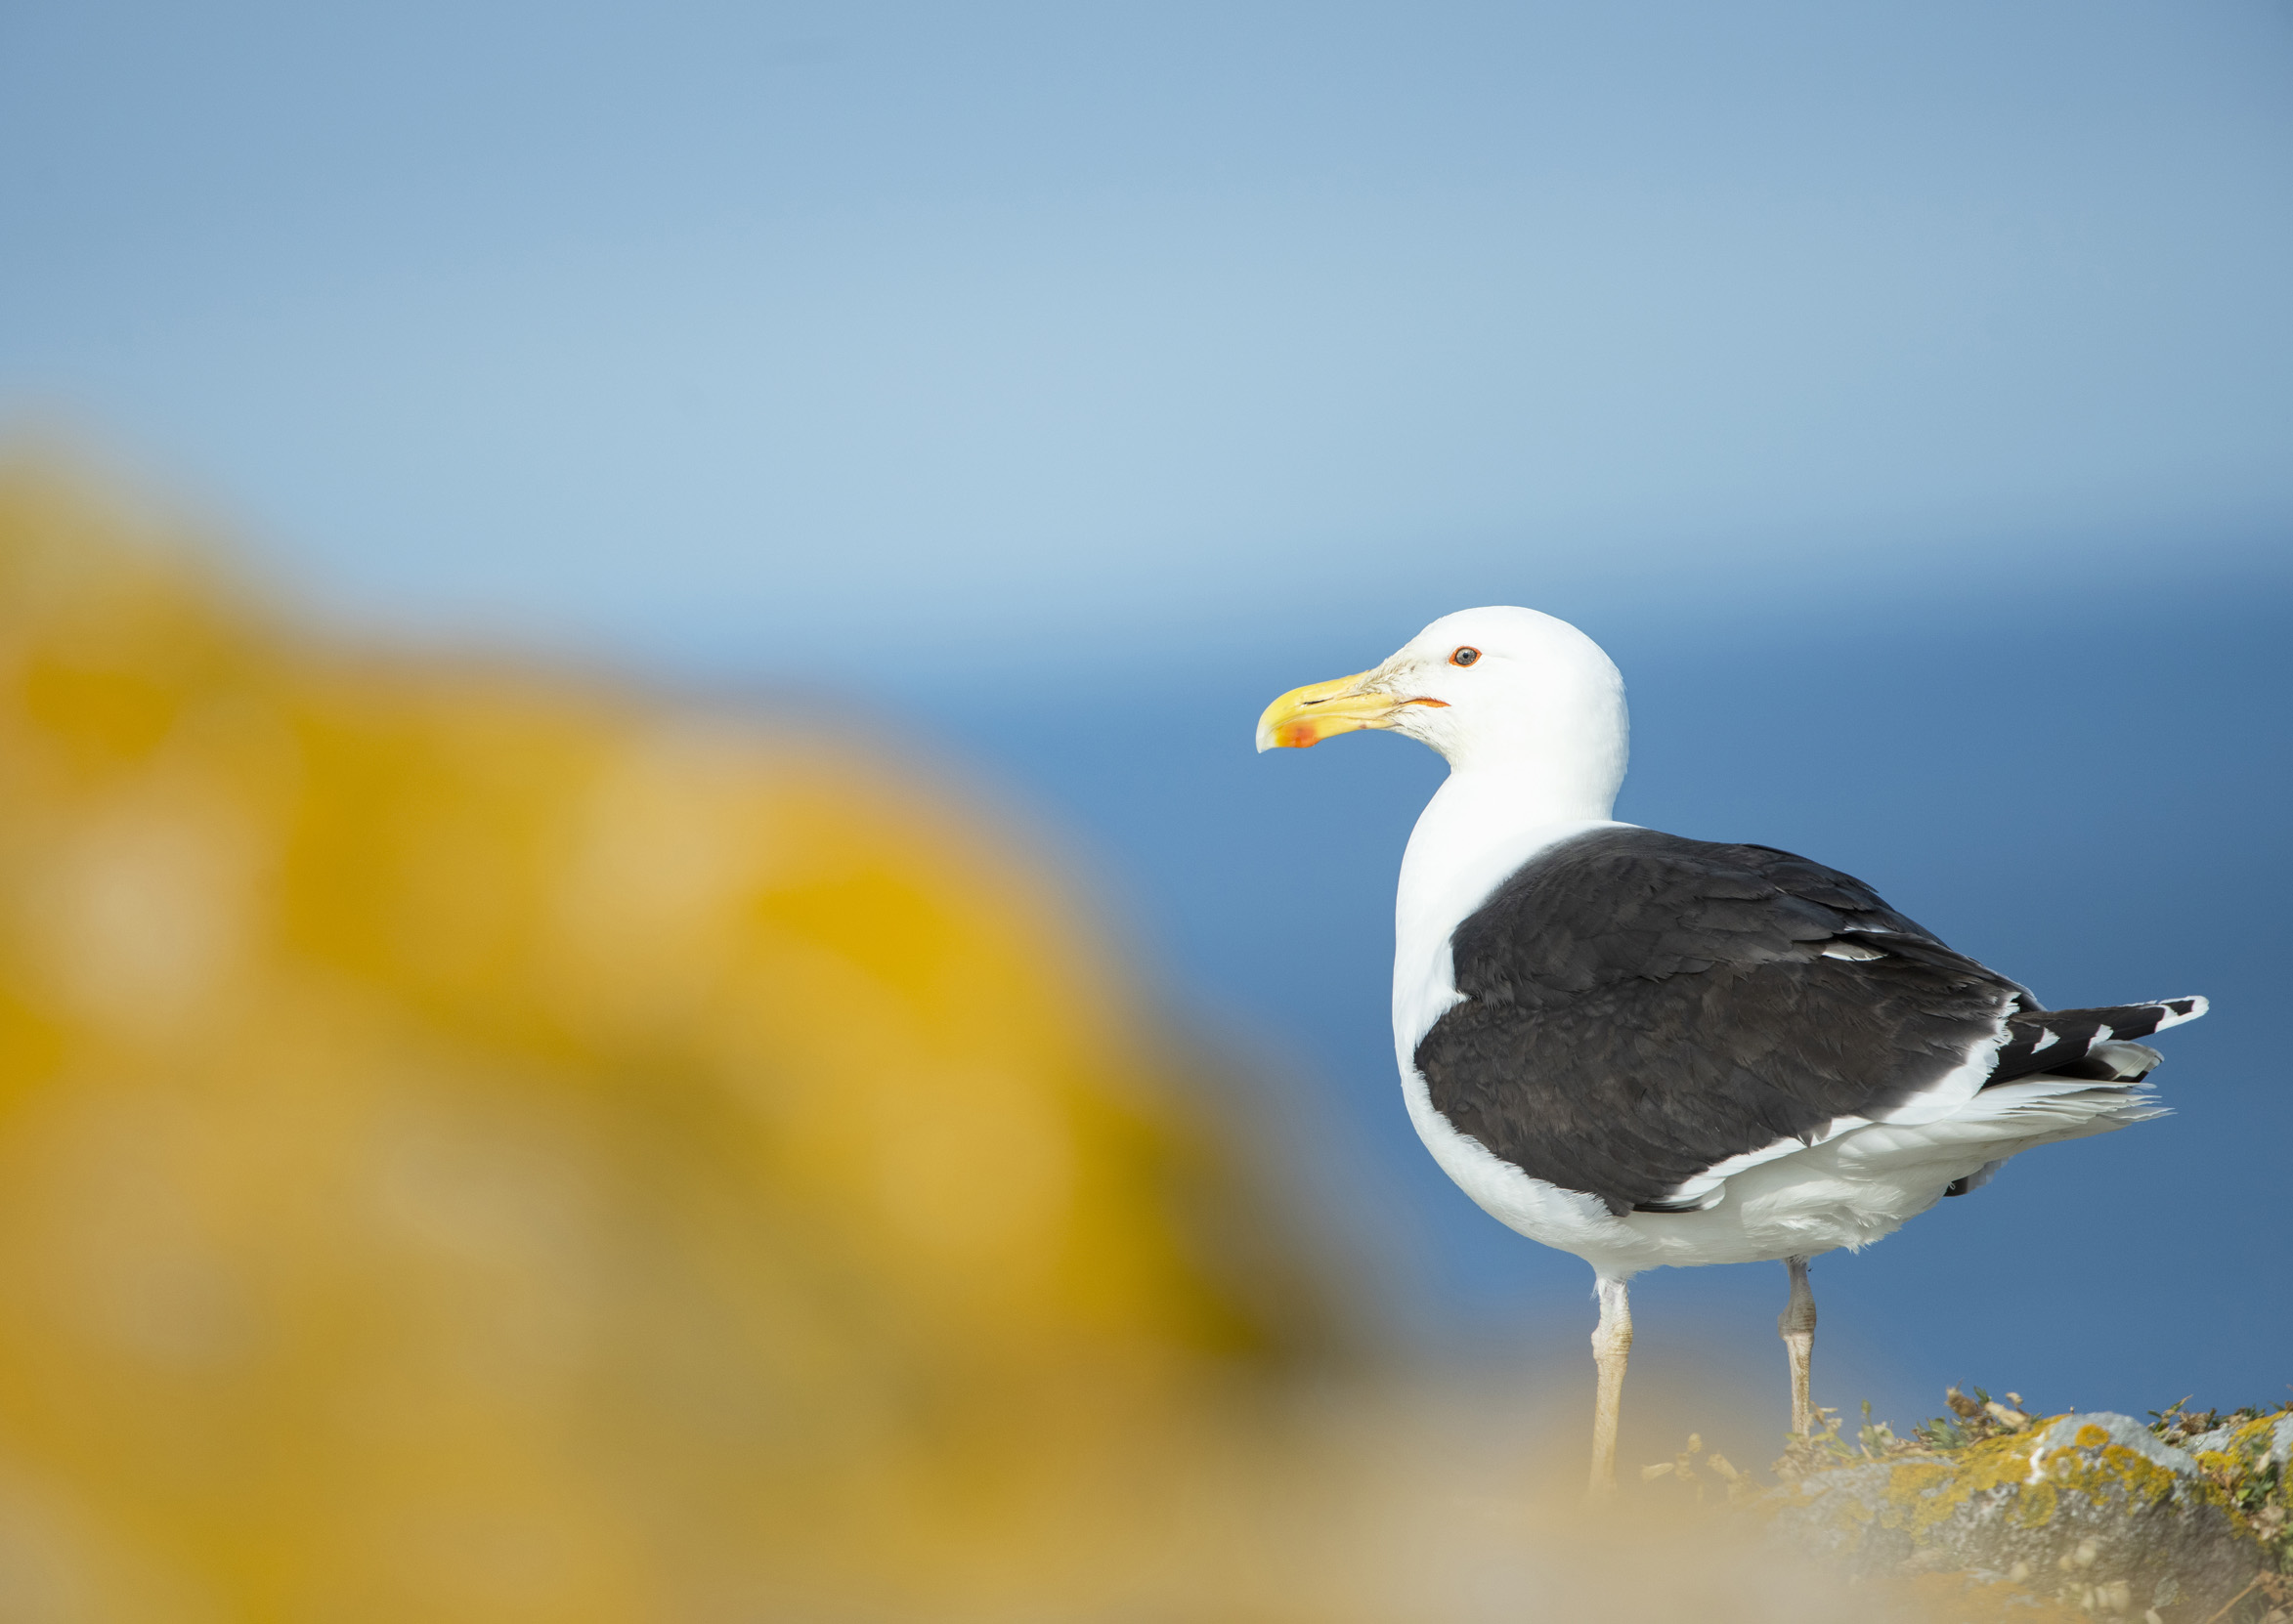 Great Black-backed Gull on cliff edge looking out to sea.